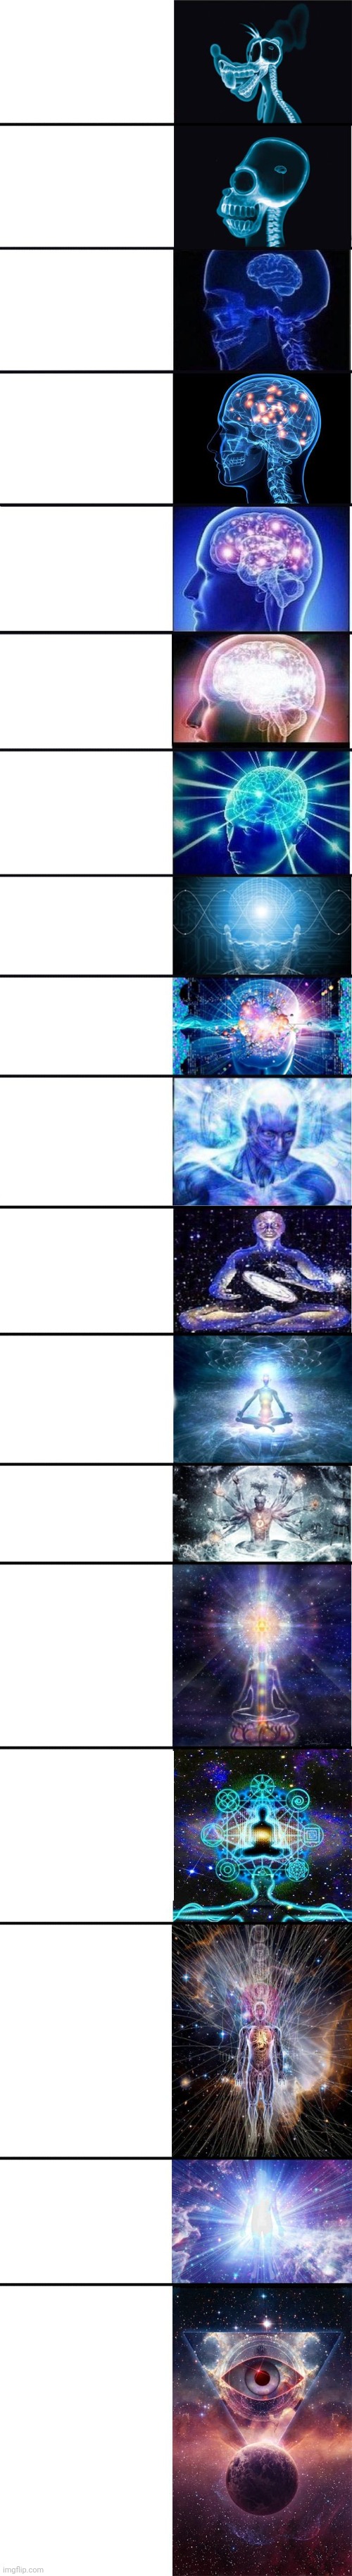 expanding brain 9001 | image tagged in expanding brain 9001 | made w/ Imgflip meme maker